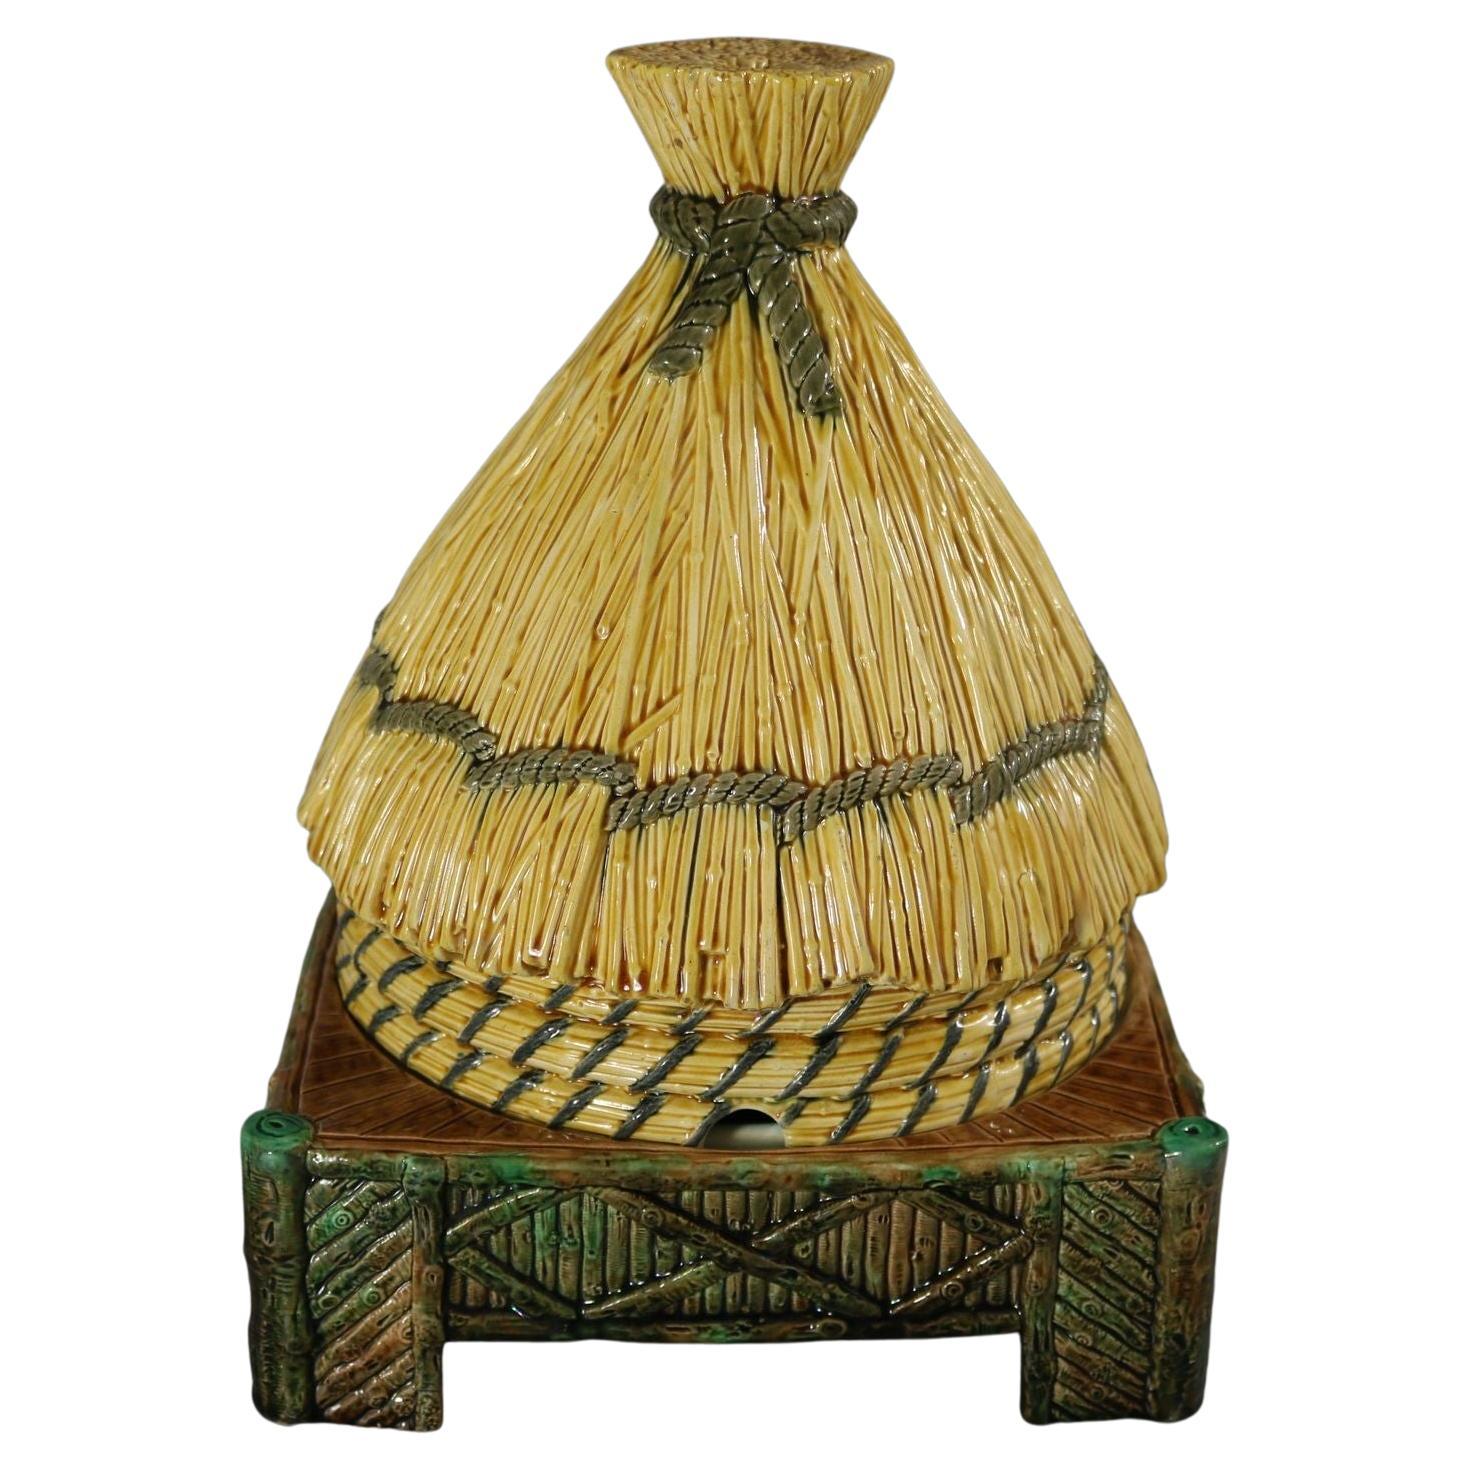 George Jones Thatched Beehive Cheese Keeper For Sale